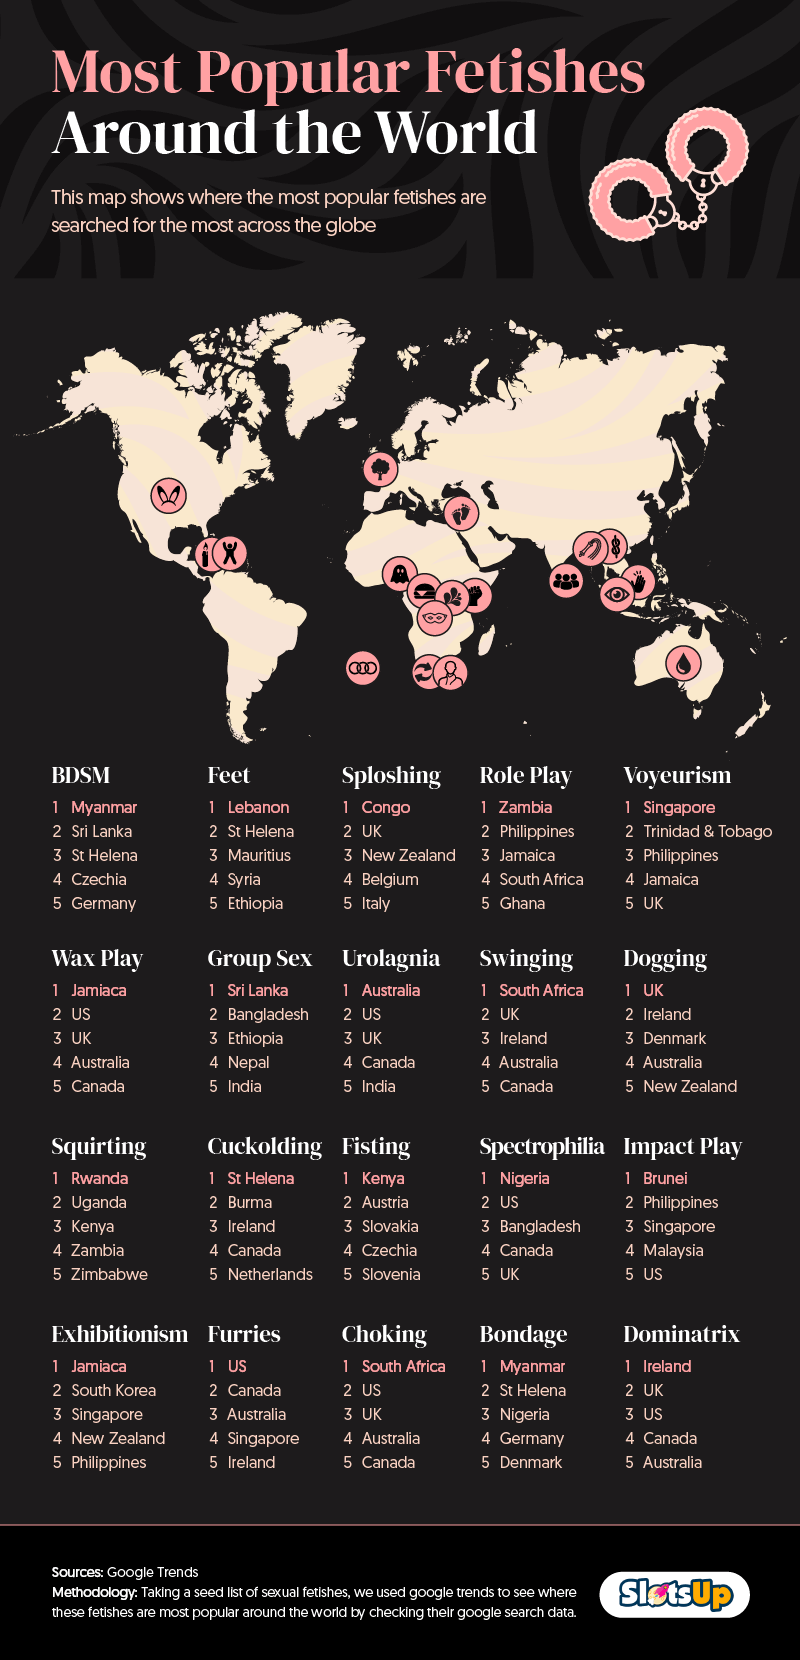 MOST POPULAR FETISHES AROUND THE WORLD